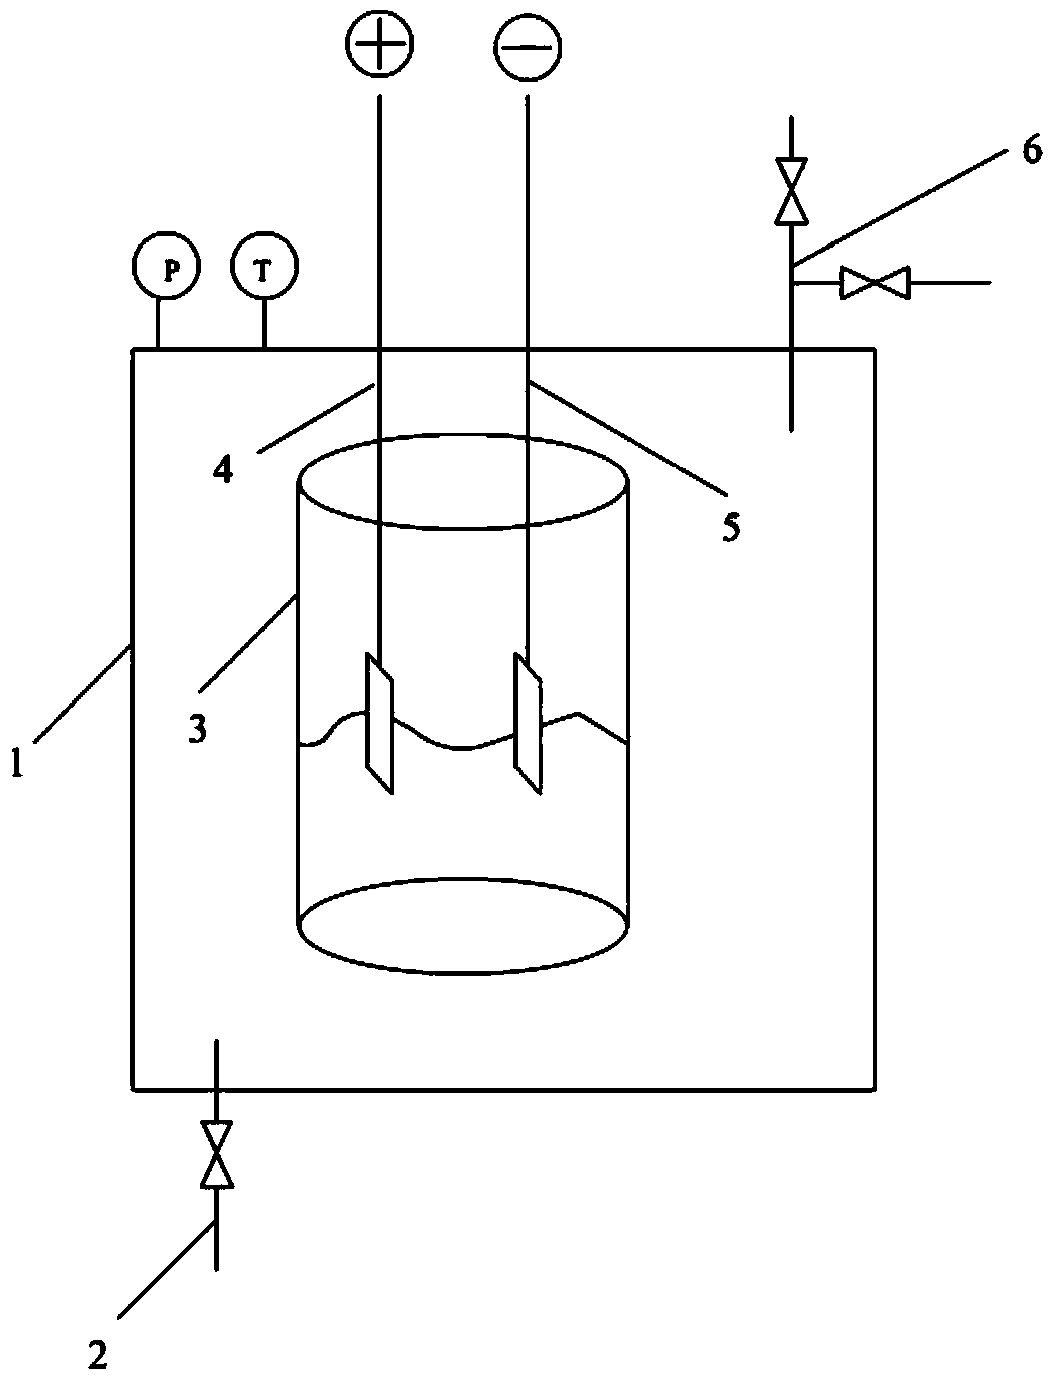 Method for recovering waste hard alloy